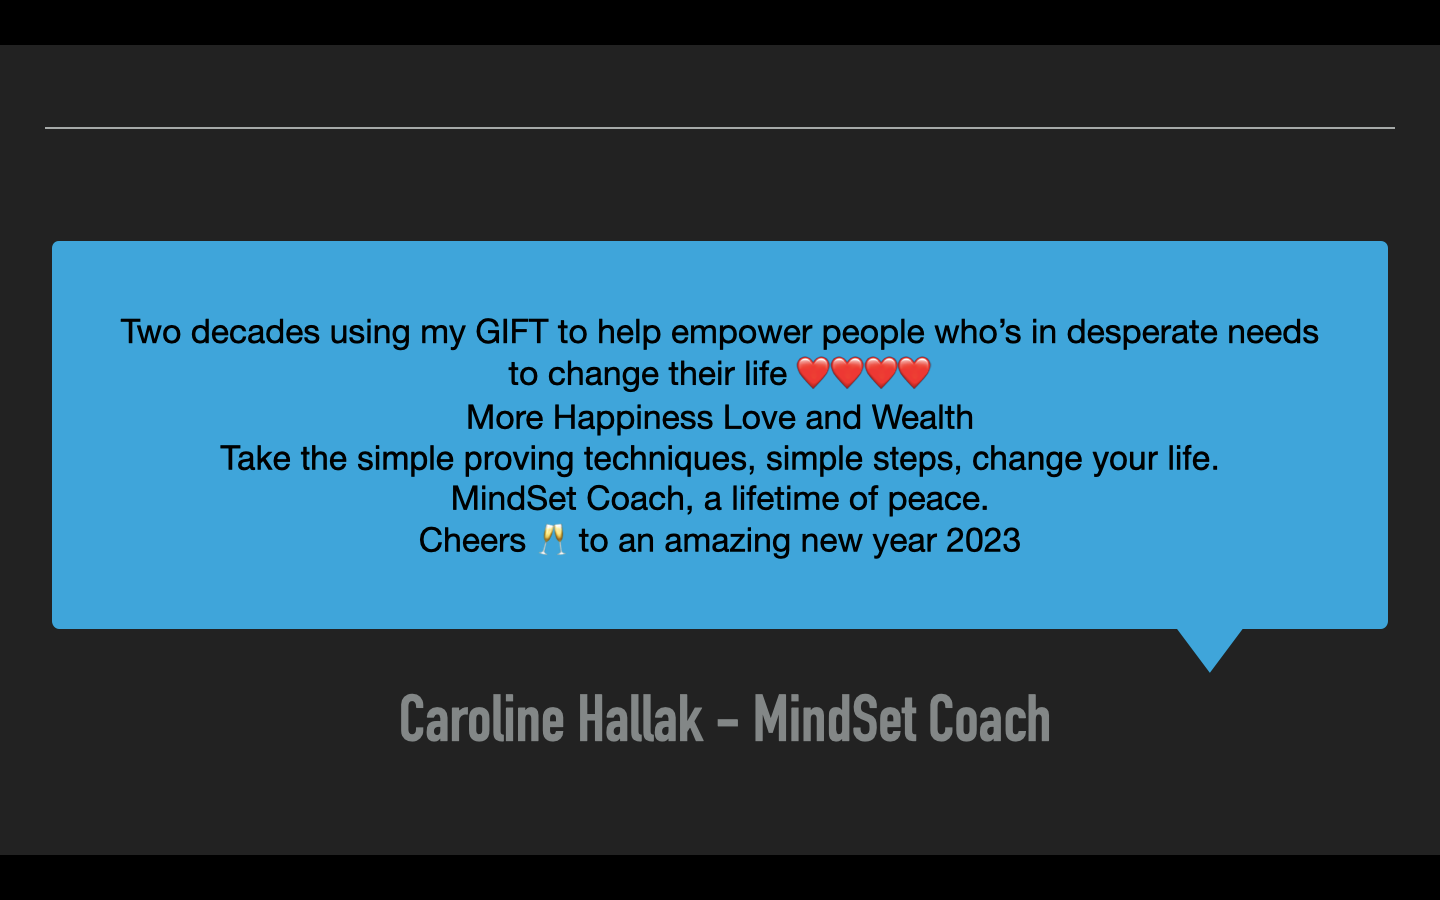 help empower people who's in desperate needs to change their life, more happiness love and wealth, with simple proven techniques, wi